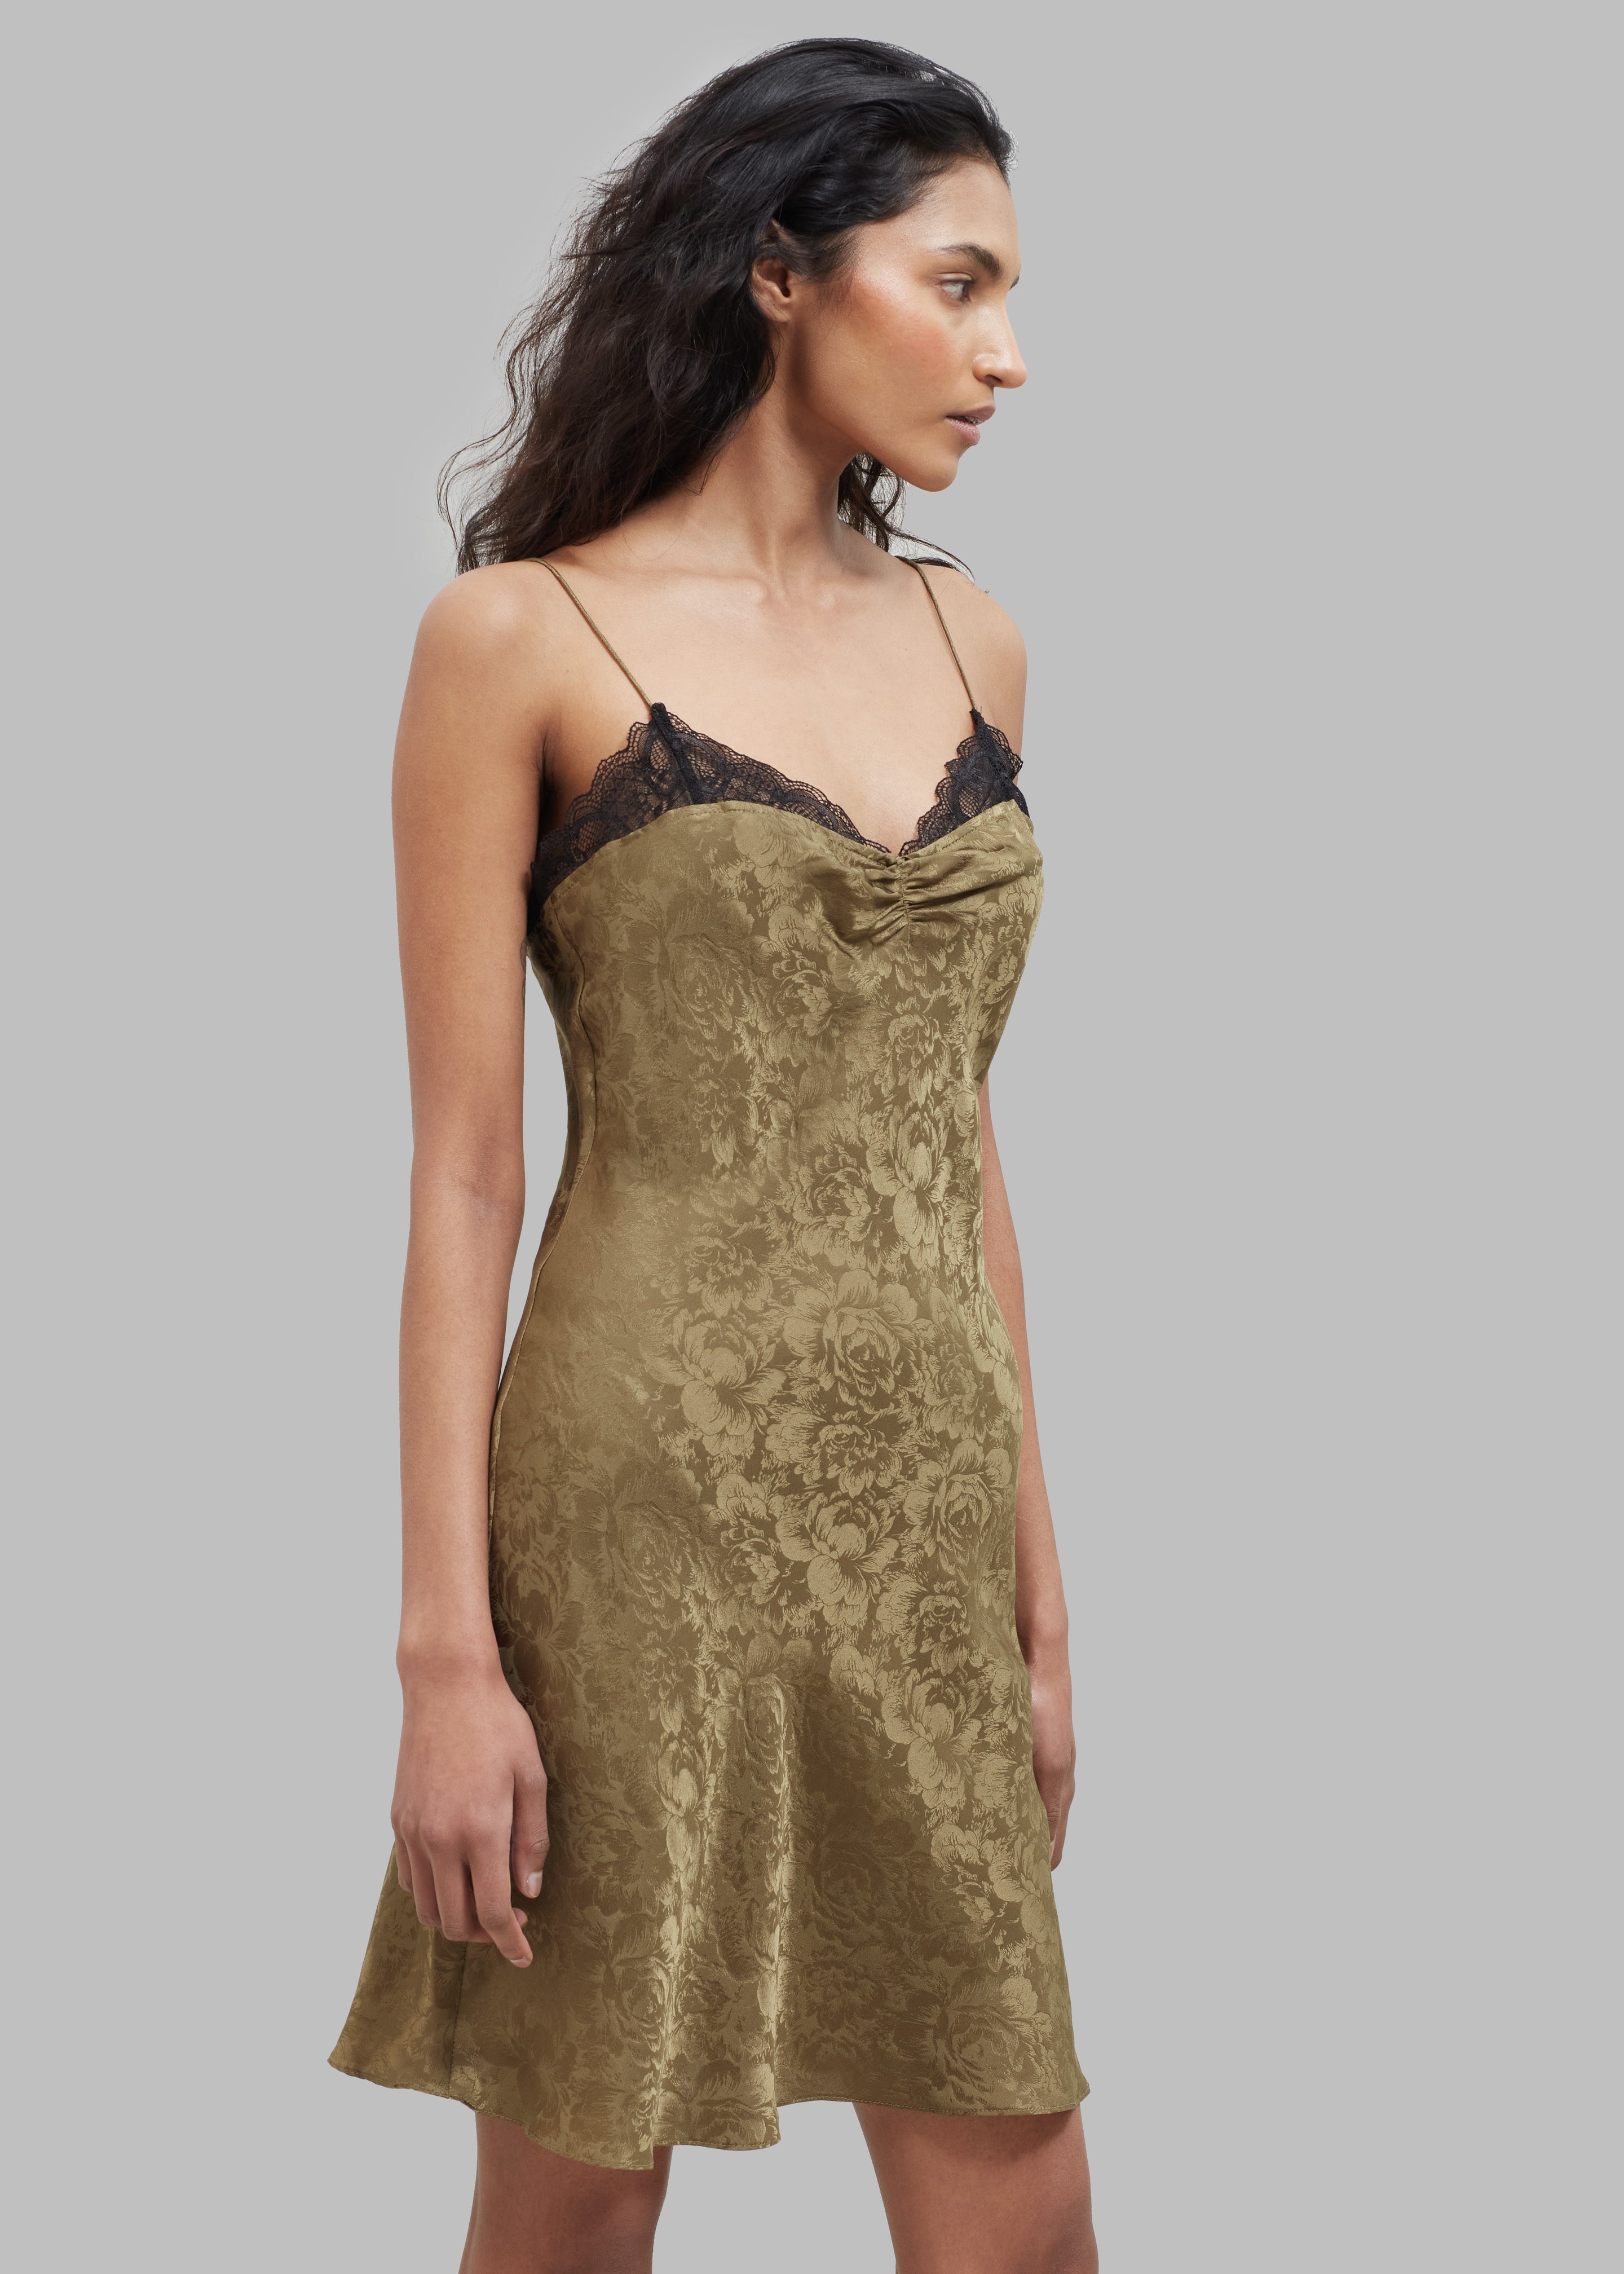 The Garment Toulouse Lace Dress - Olive with Black Lace - 5